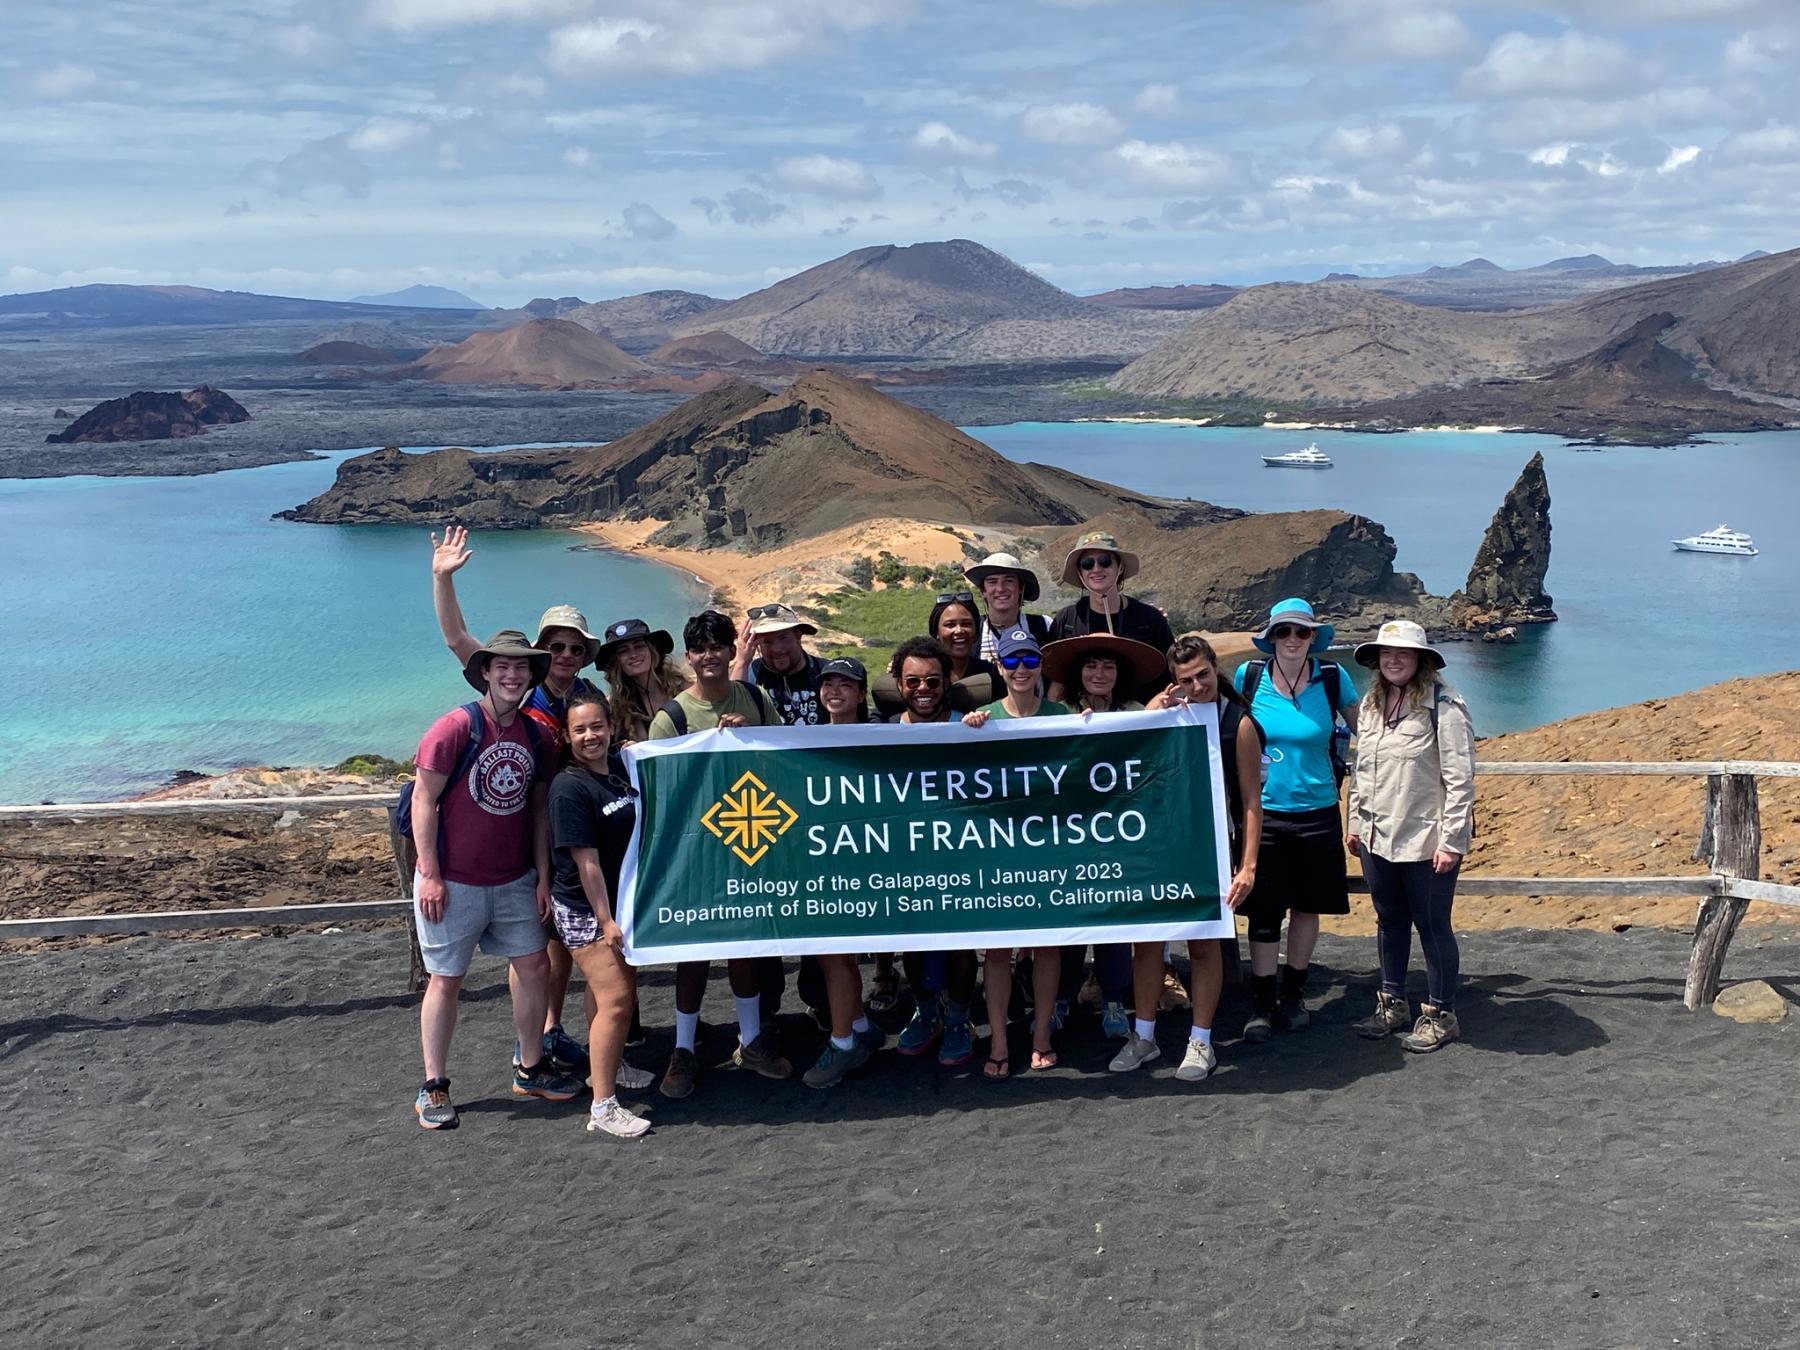 Group of students in Galapagos Islands during Intersession